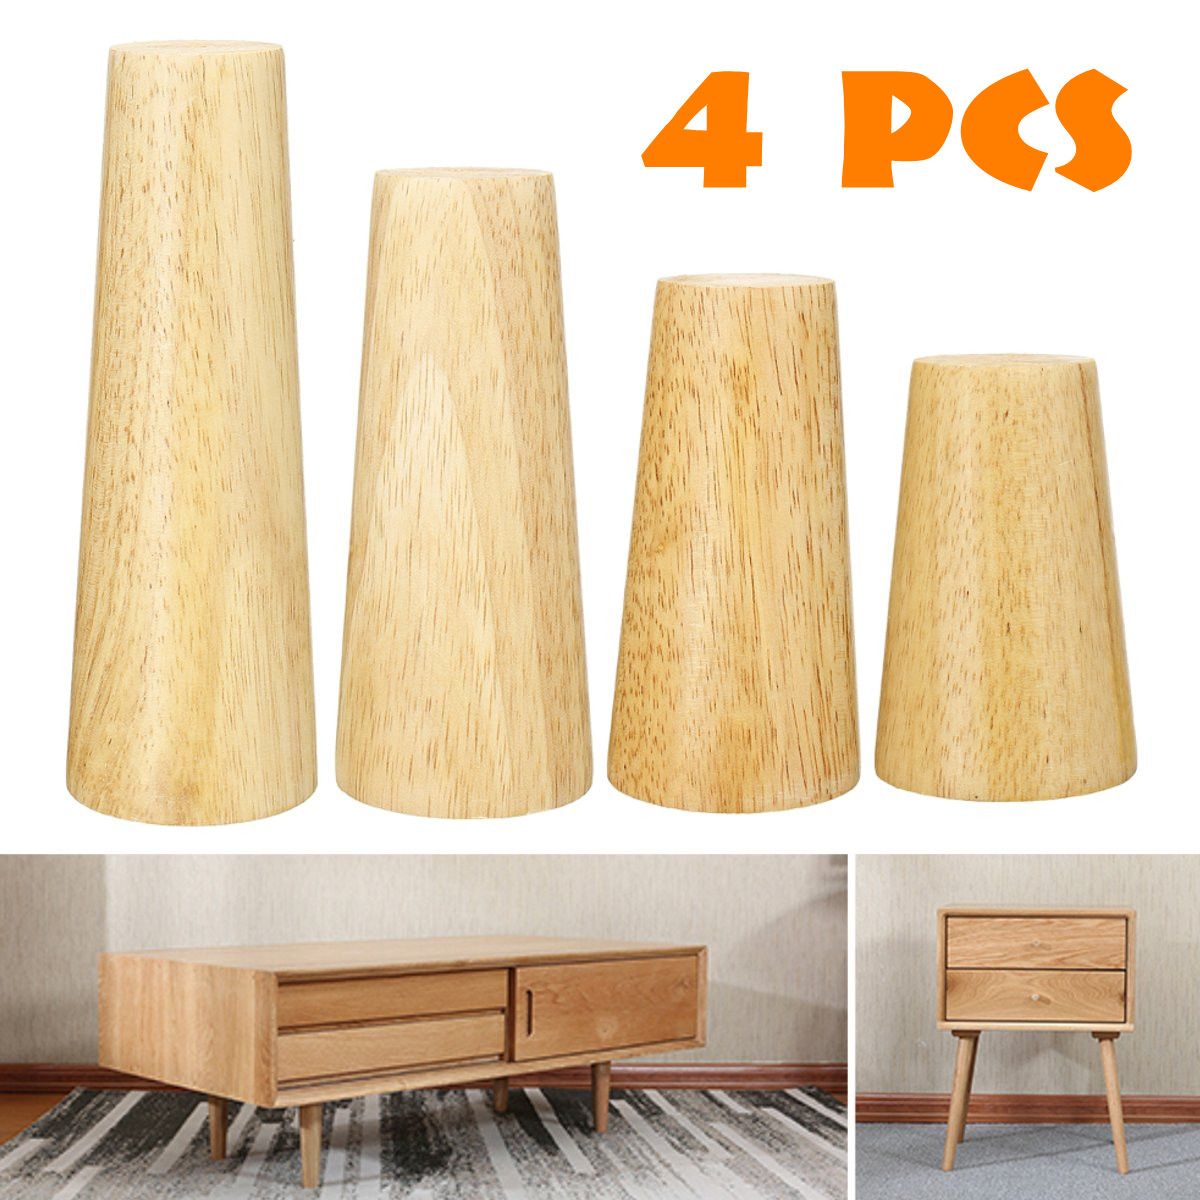 4PcsSet-Solid-Wooden-Cone-Angled-Furniture-Legs-Kit-Sofa-Table-Chair-Stool-Part-Leg-Support-1631830